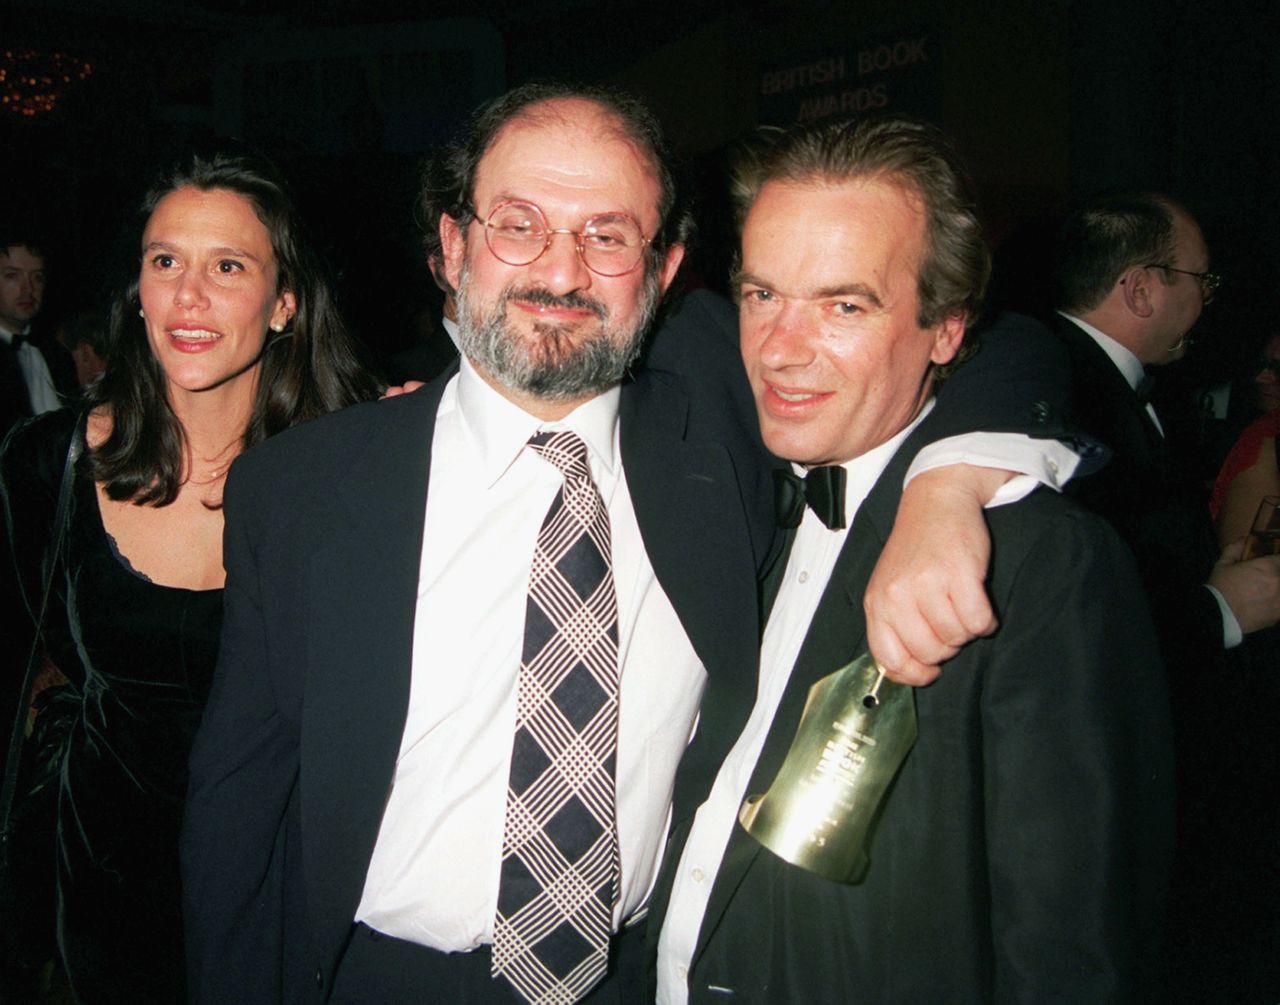 Rushdie, here with Martin Amis, won the 1995 Author of the Year award on February 9, 1996. 